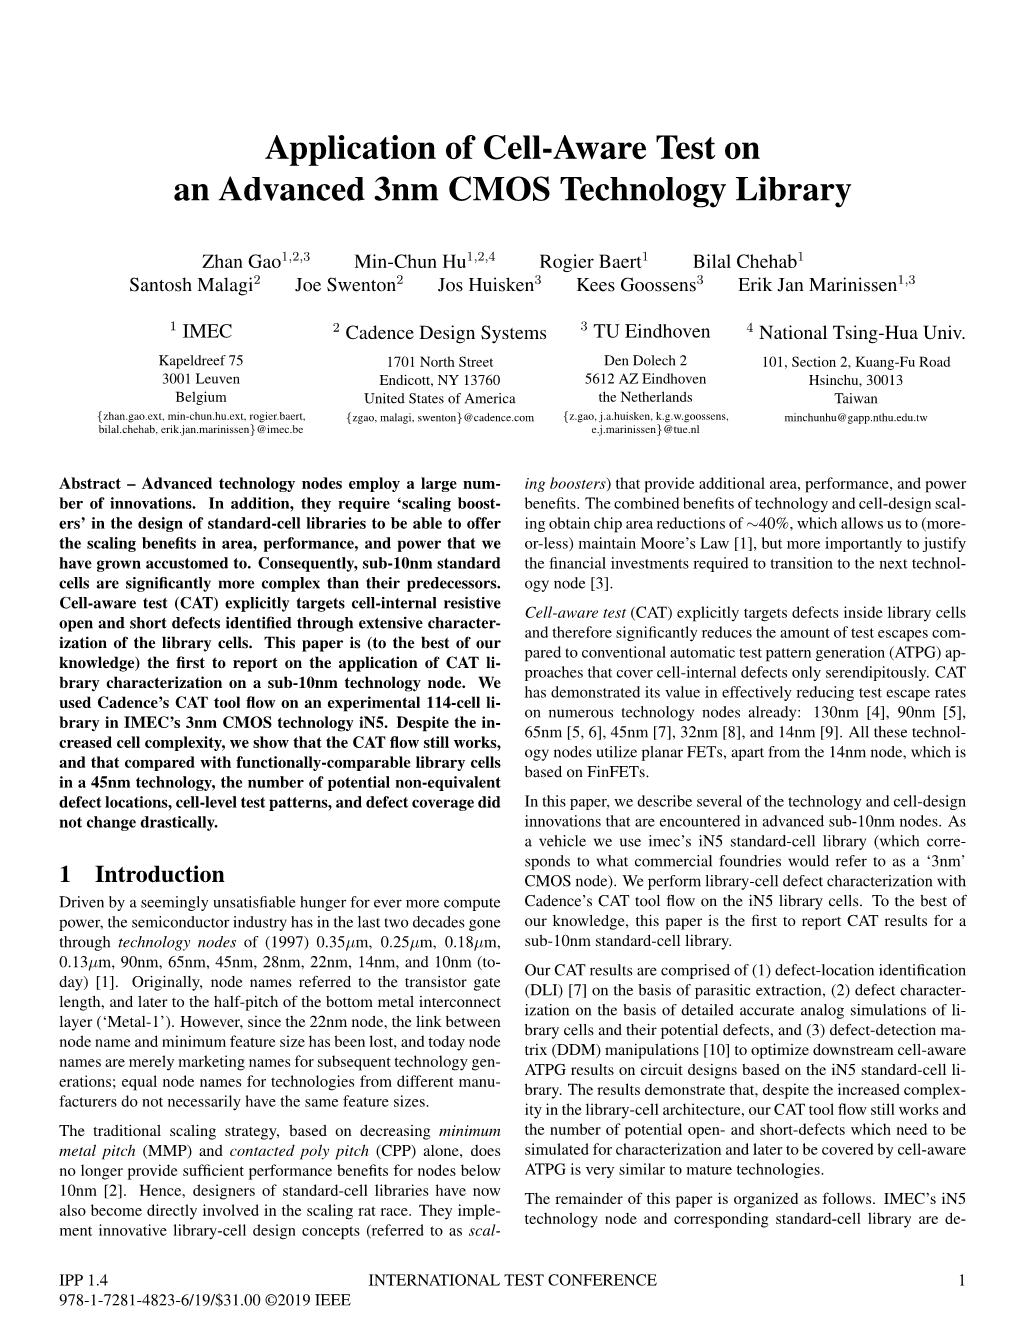 Application of Cell-Aware Test on an Advanced 3Nm CMOS Technology Library